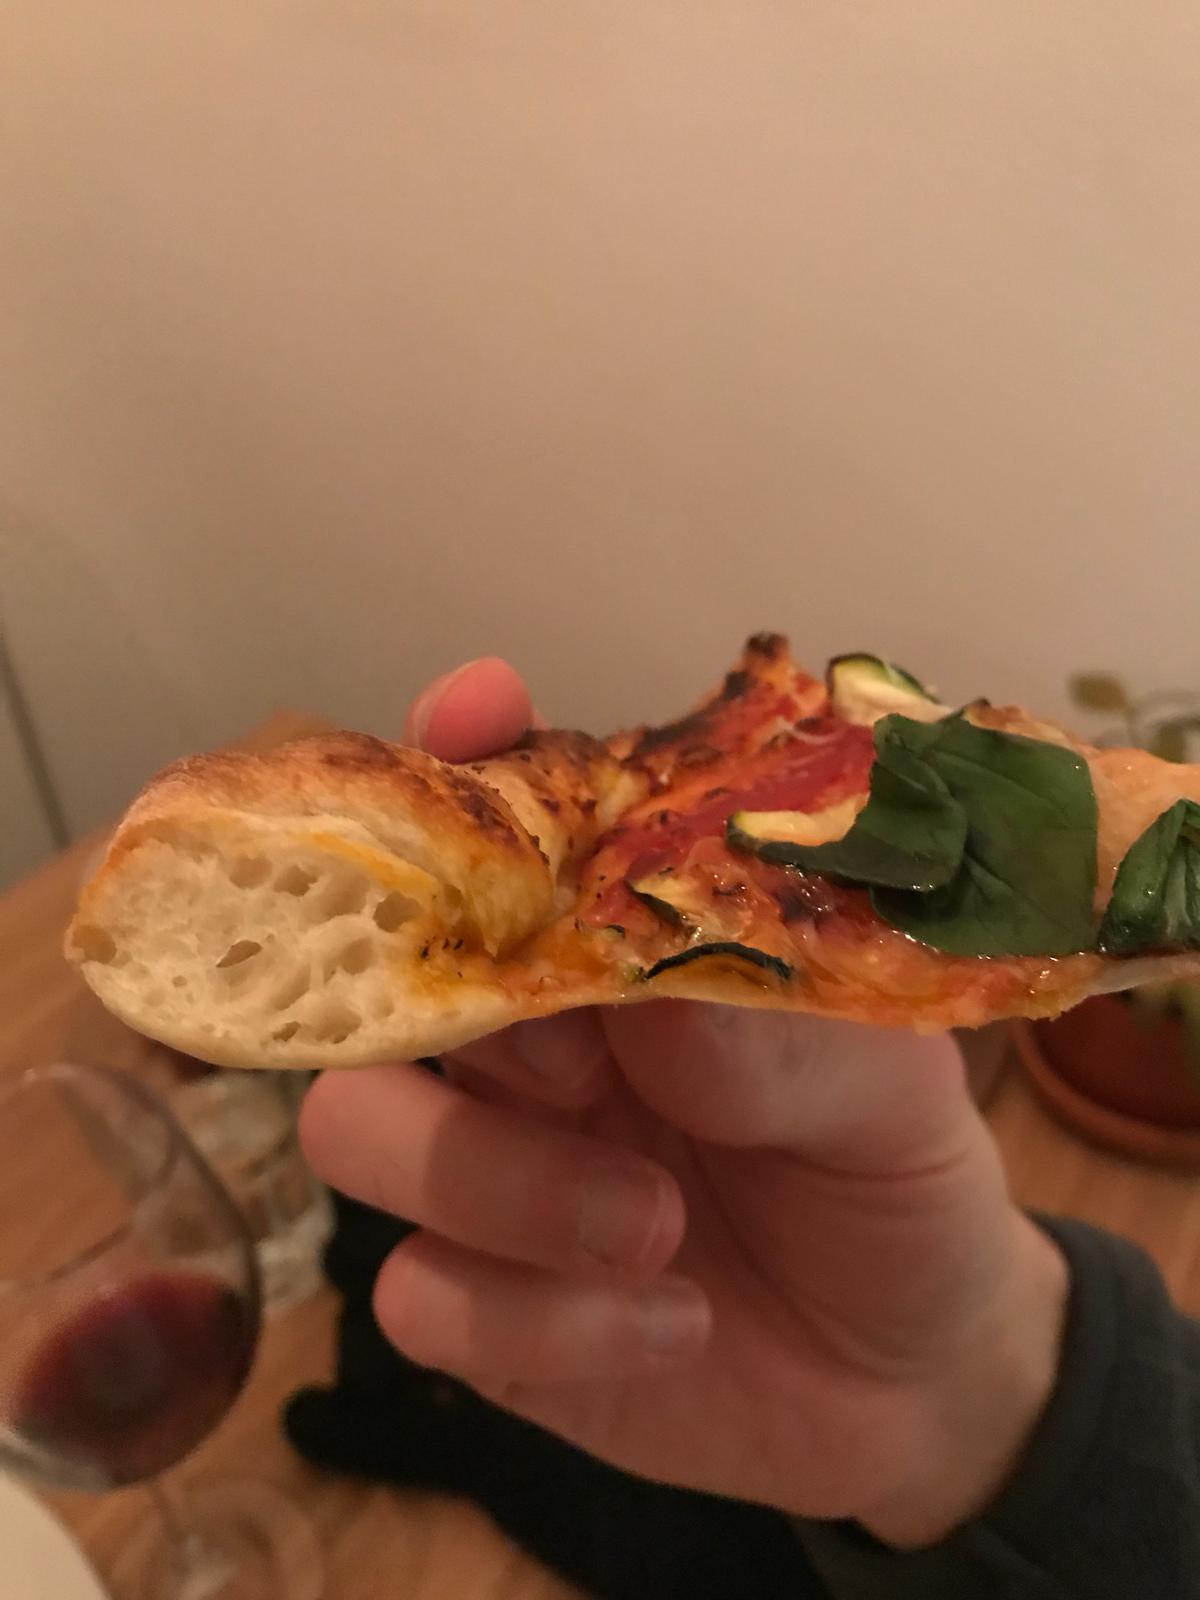 An image of a bread called “Affoe Apt Pizza”